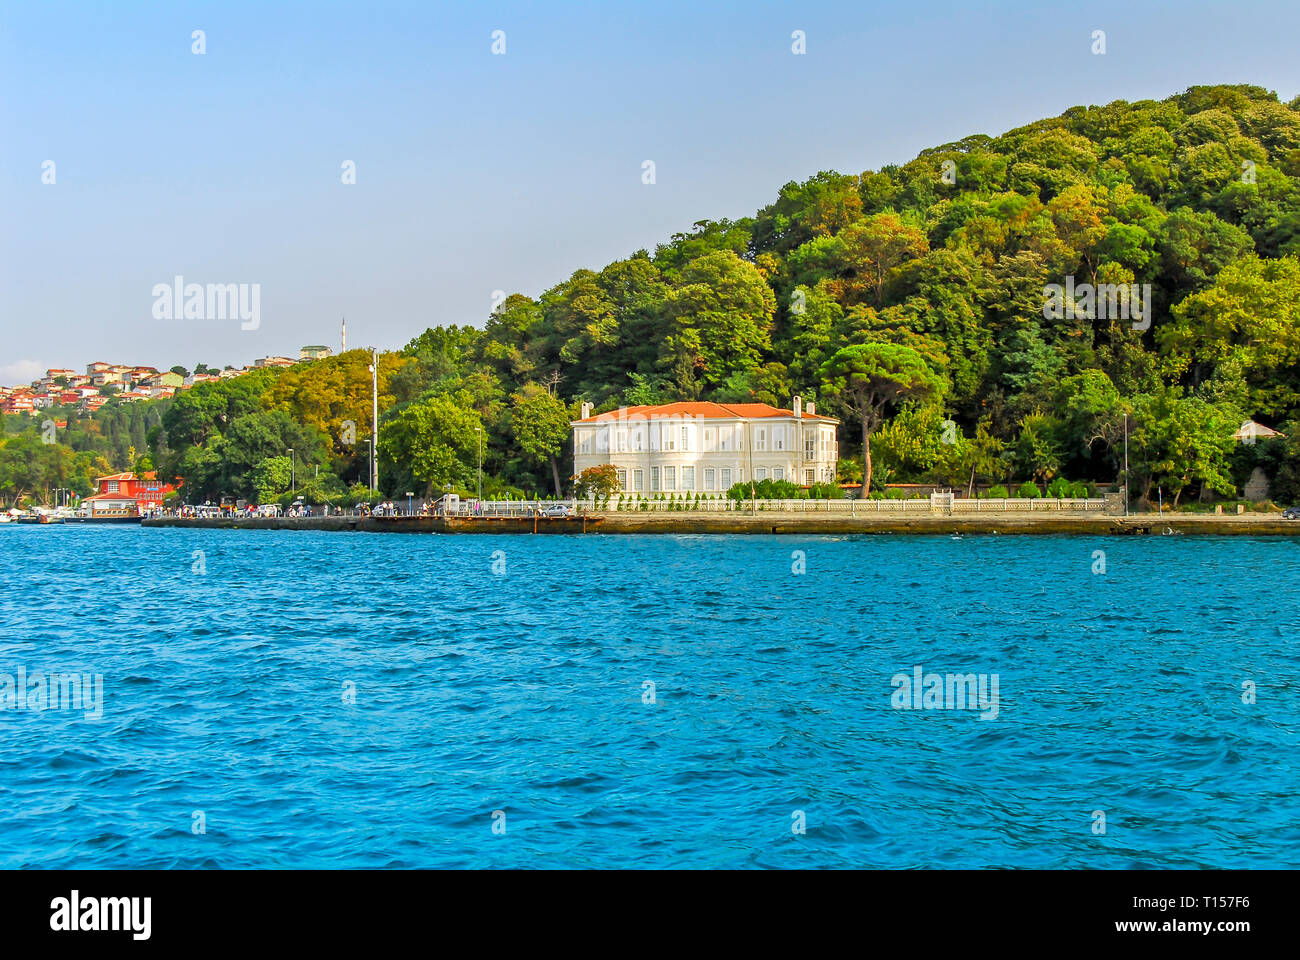 Istanbul, Turkey, 2 September 2007: Water Mansion and boats of Cubuklu at Beykoz district of Istanbul Stock Photo